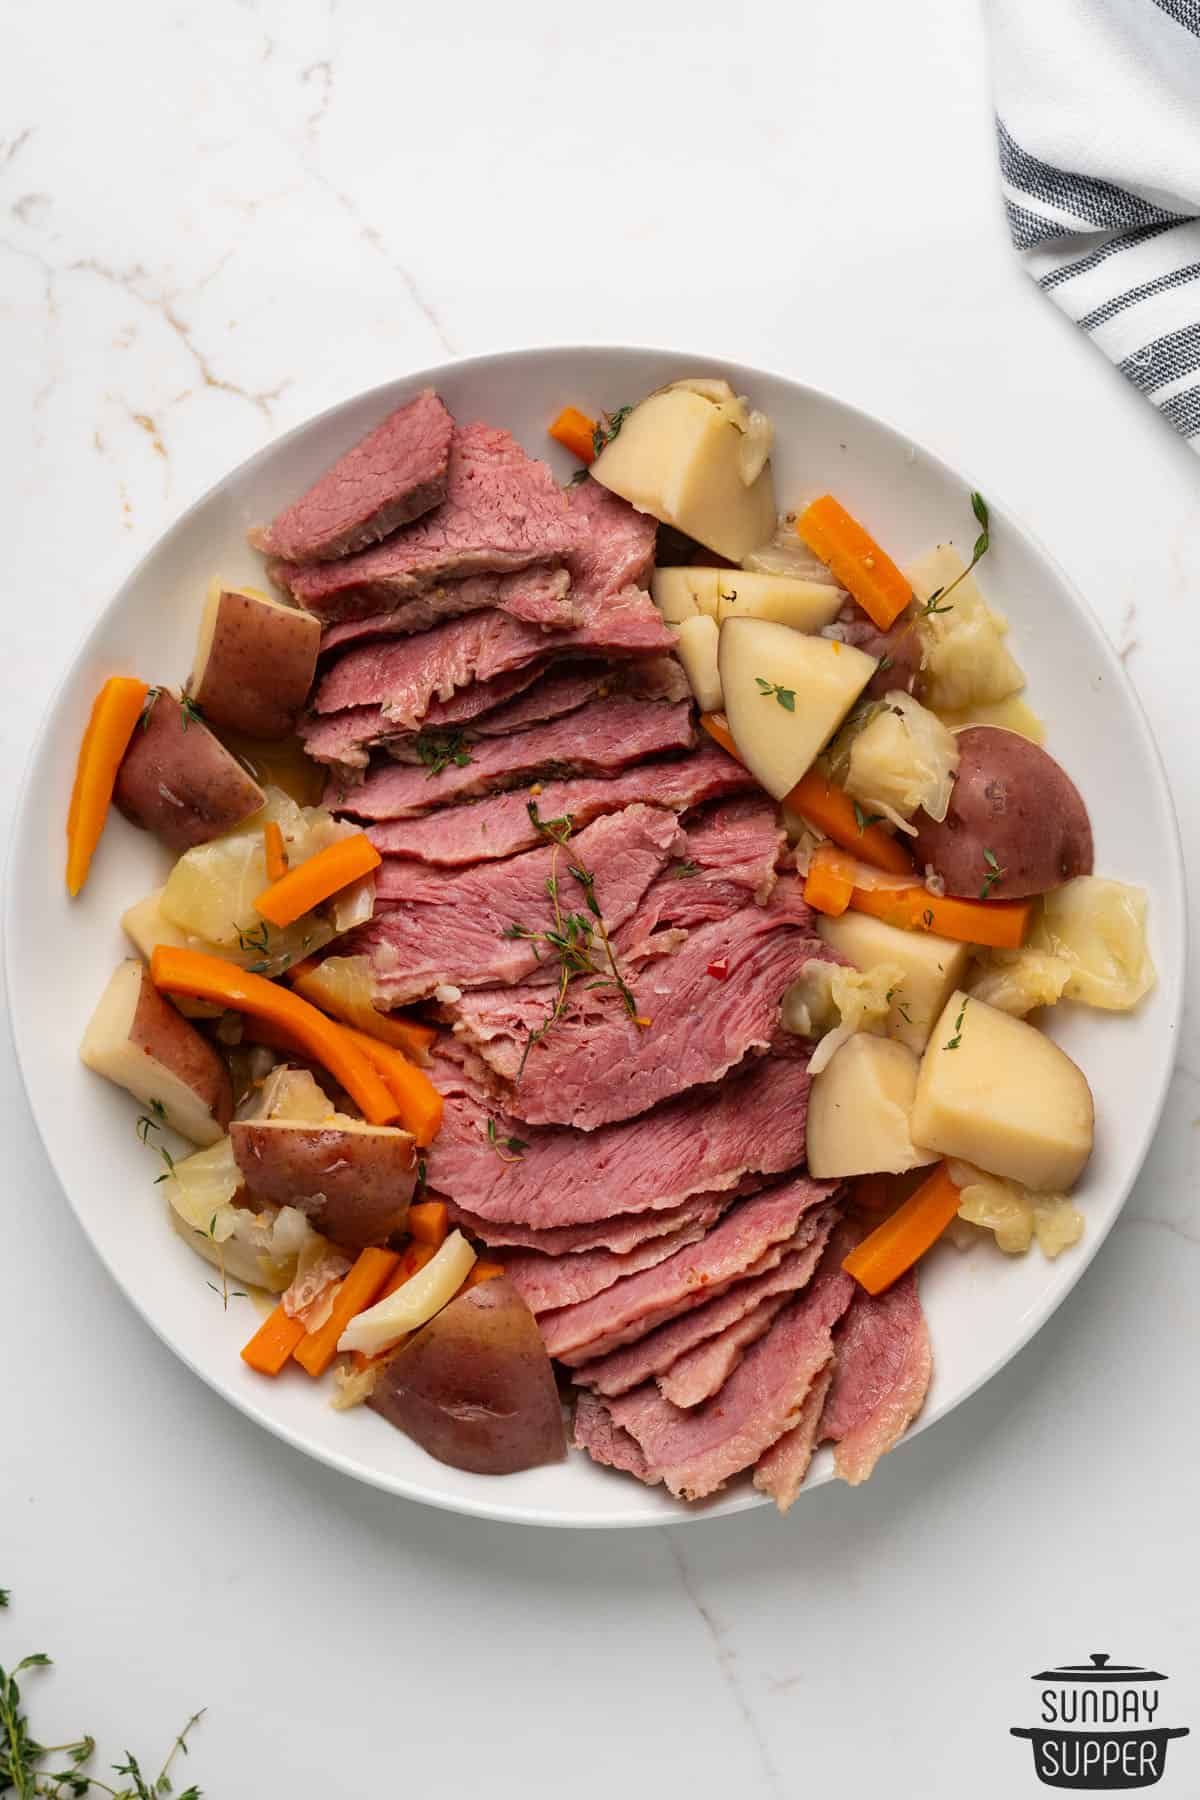 sliced corned beef on a serving dish with boiled vegetables